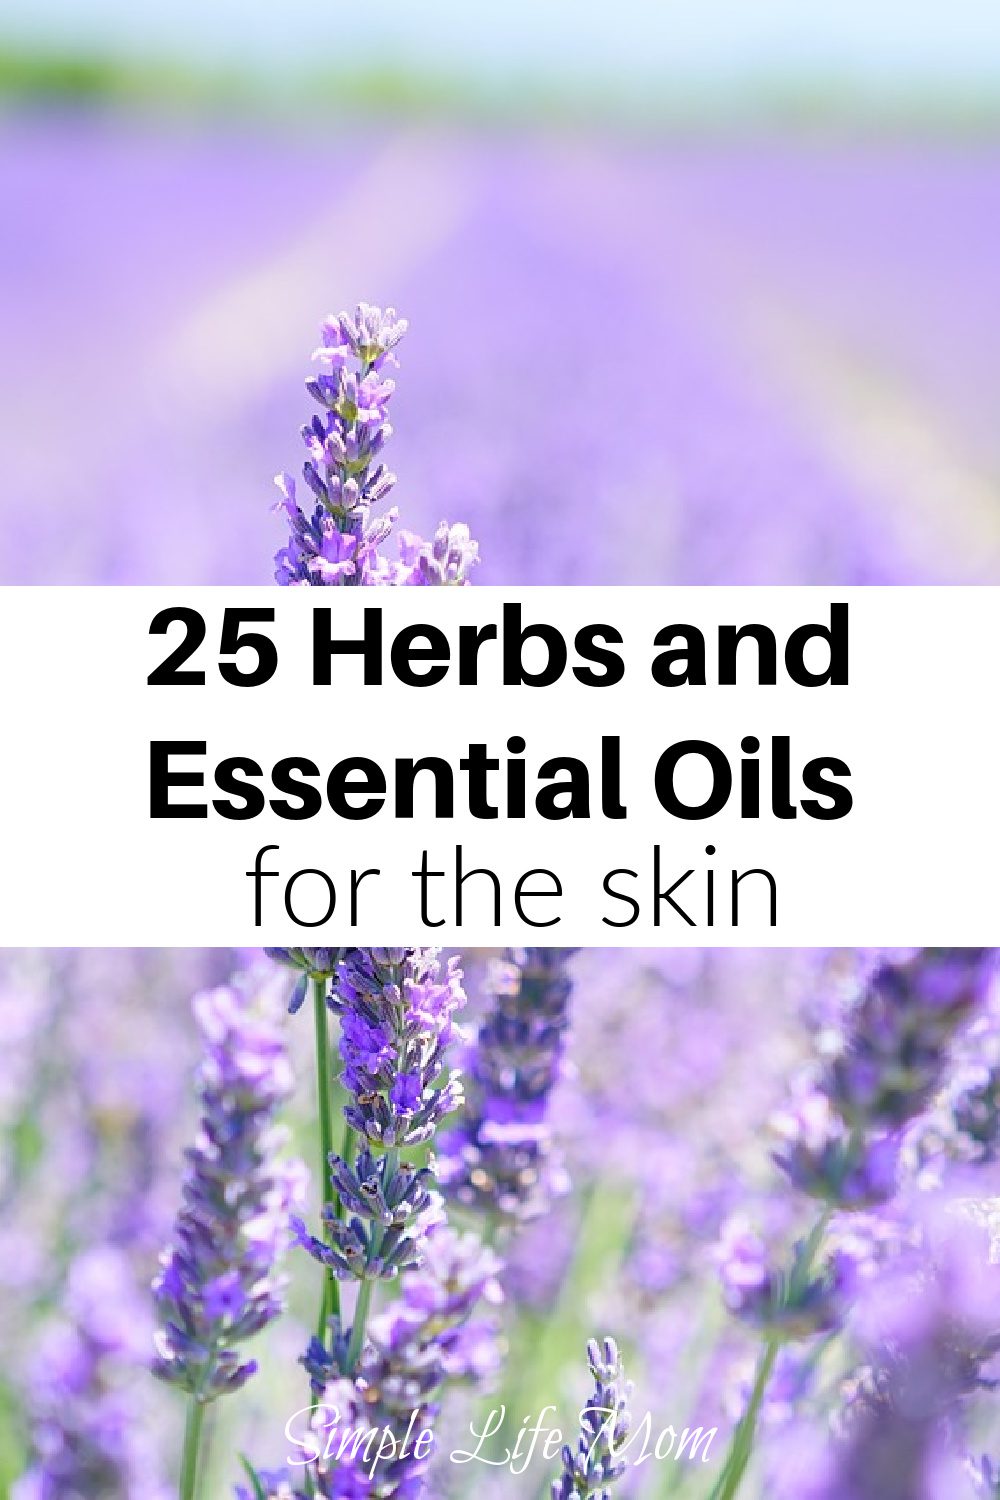 25 Herbs and Essential Oils for Skin – Organic Skin Care - Simple Life Mom